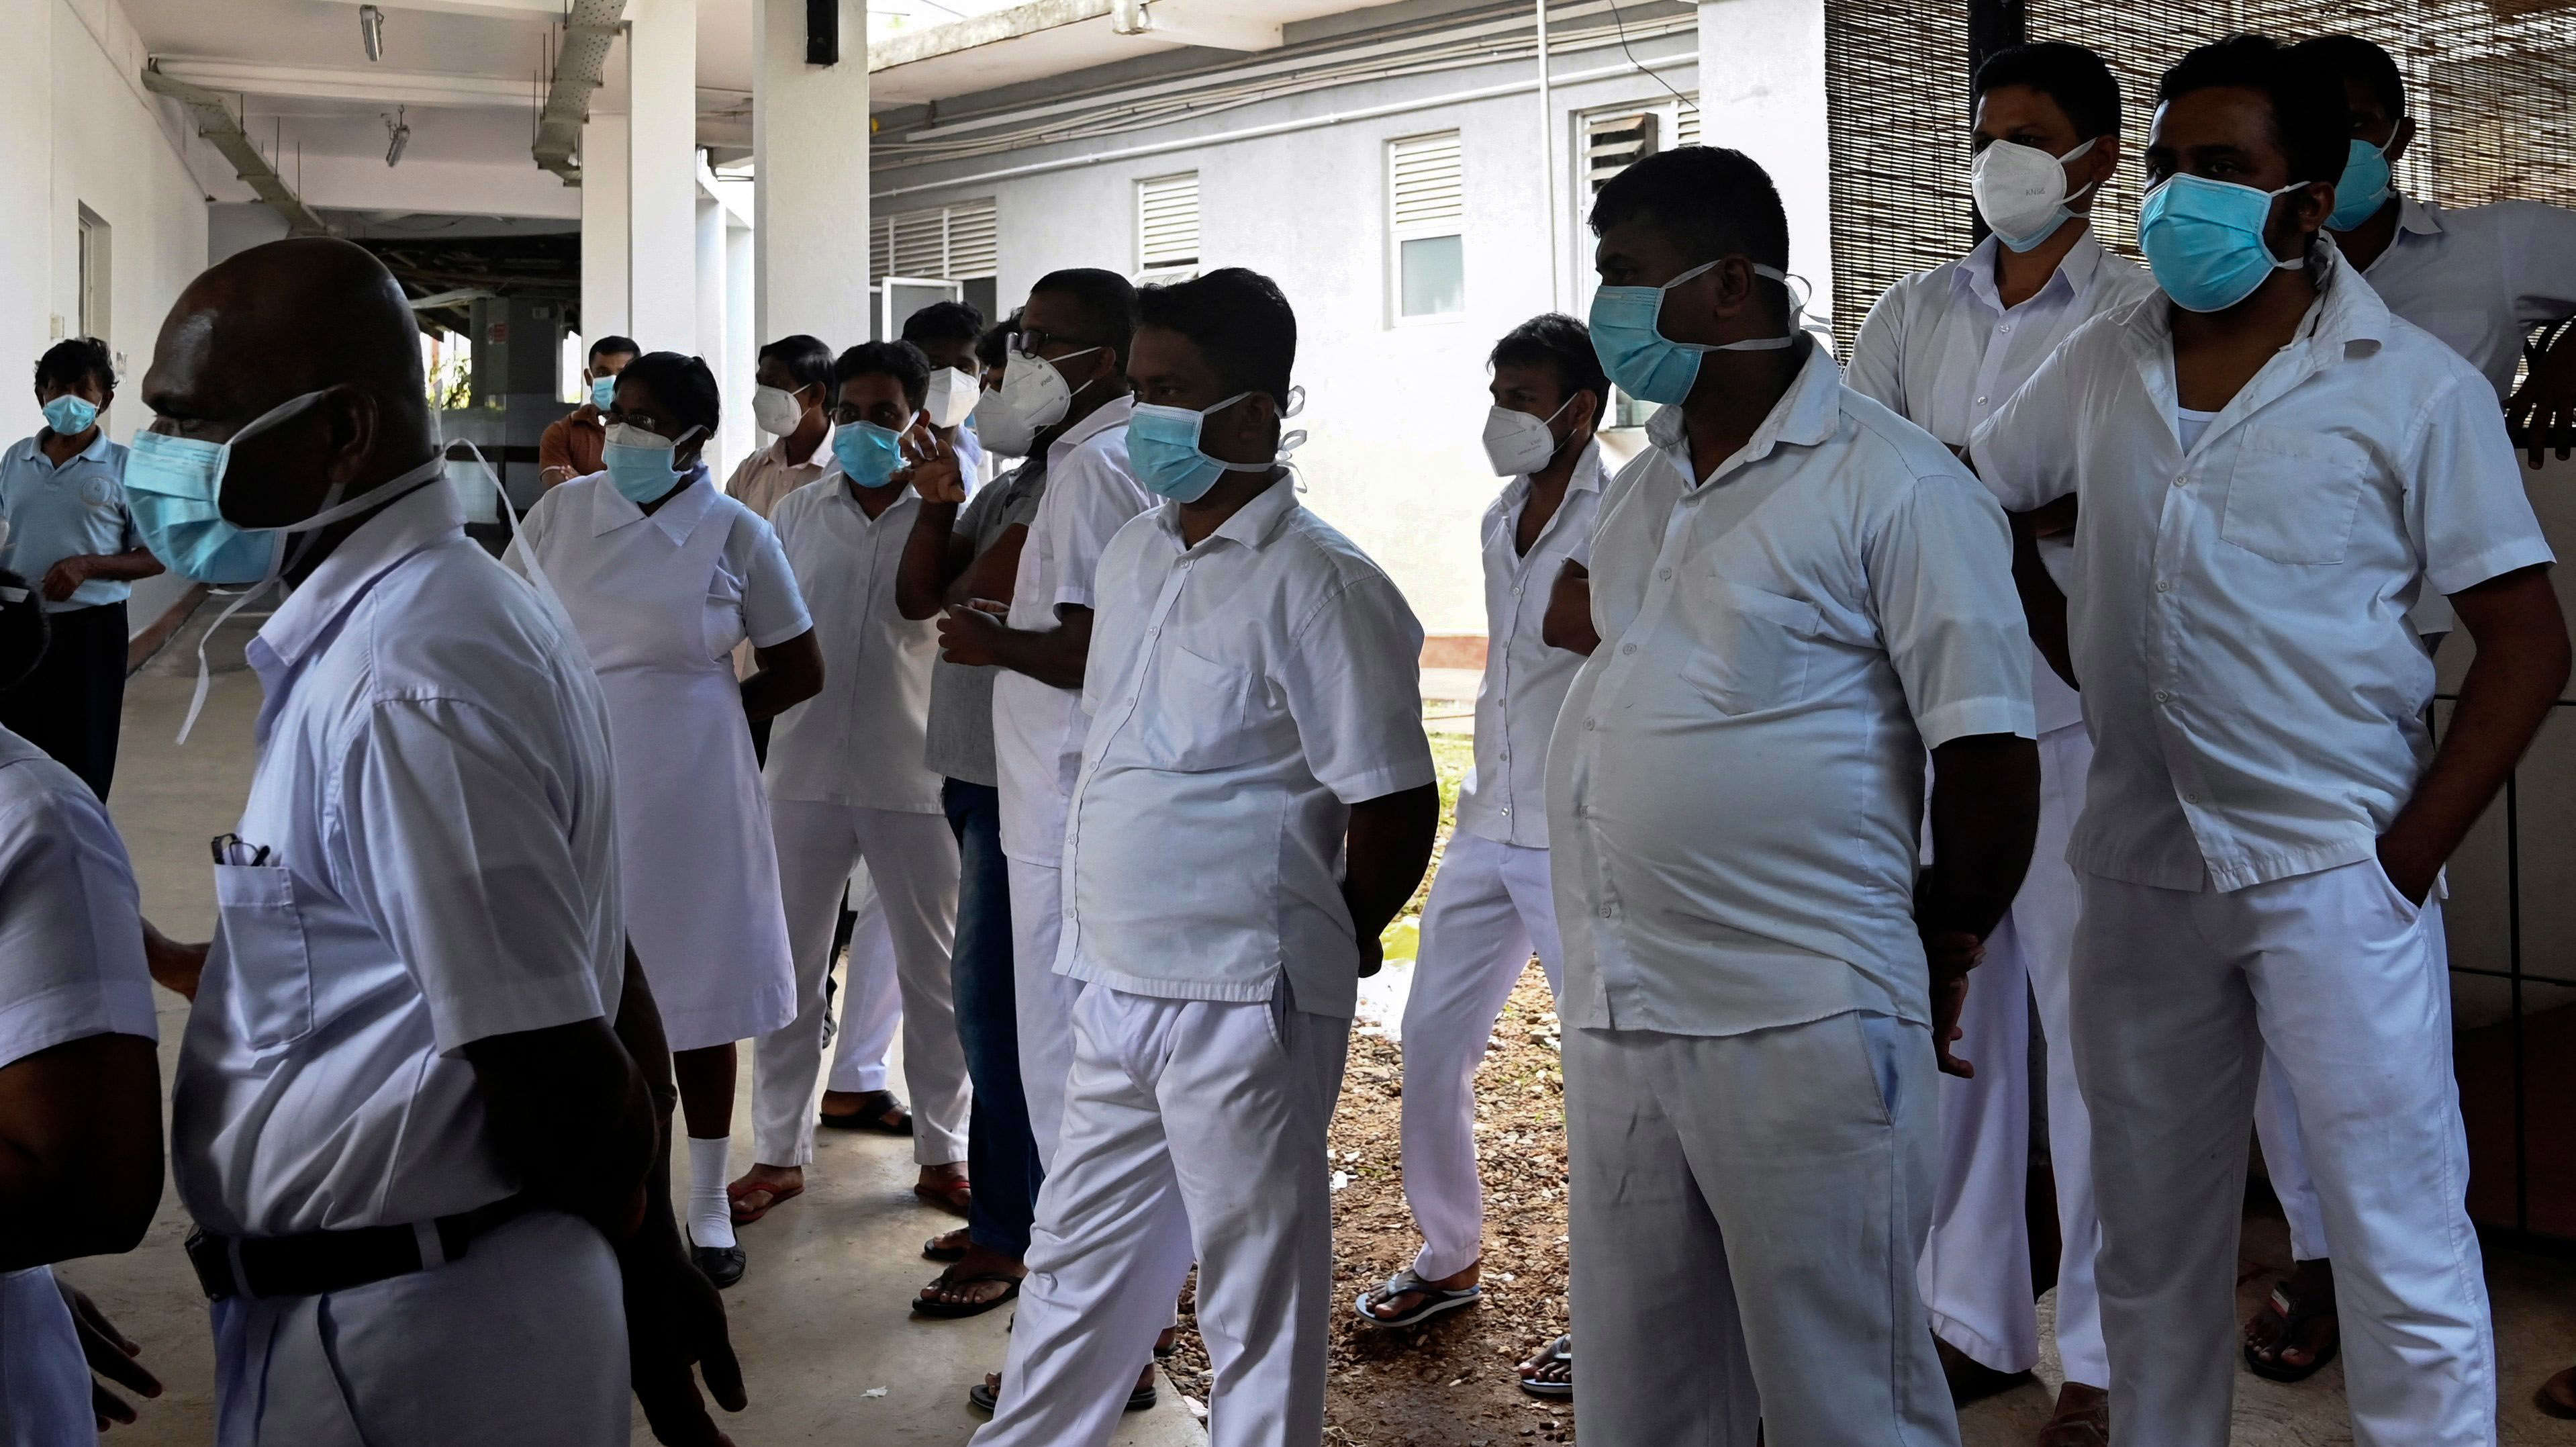 Health workers take part in a strike to demand the same incentives doctors are receiving for their frontline work against the Covid-19, at Colombo South Teaching Hospital in Colombo on June 11, 2021. (AFP image)